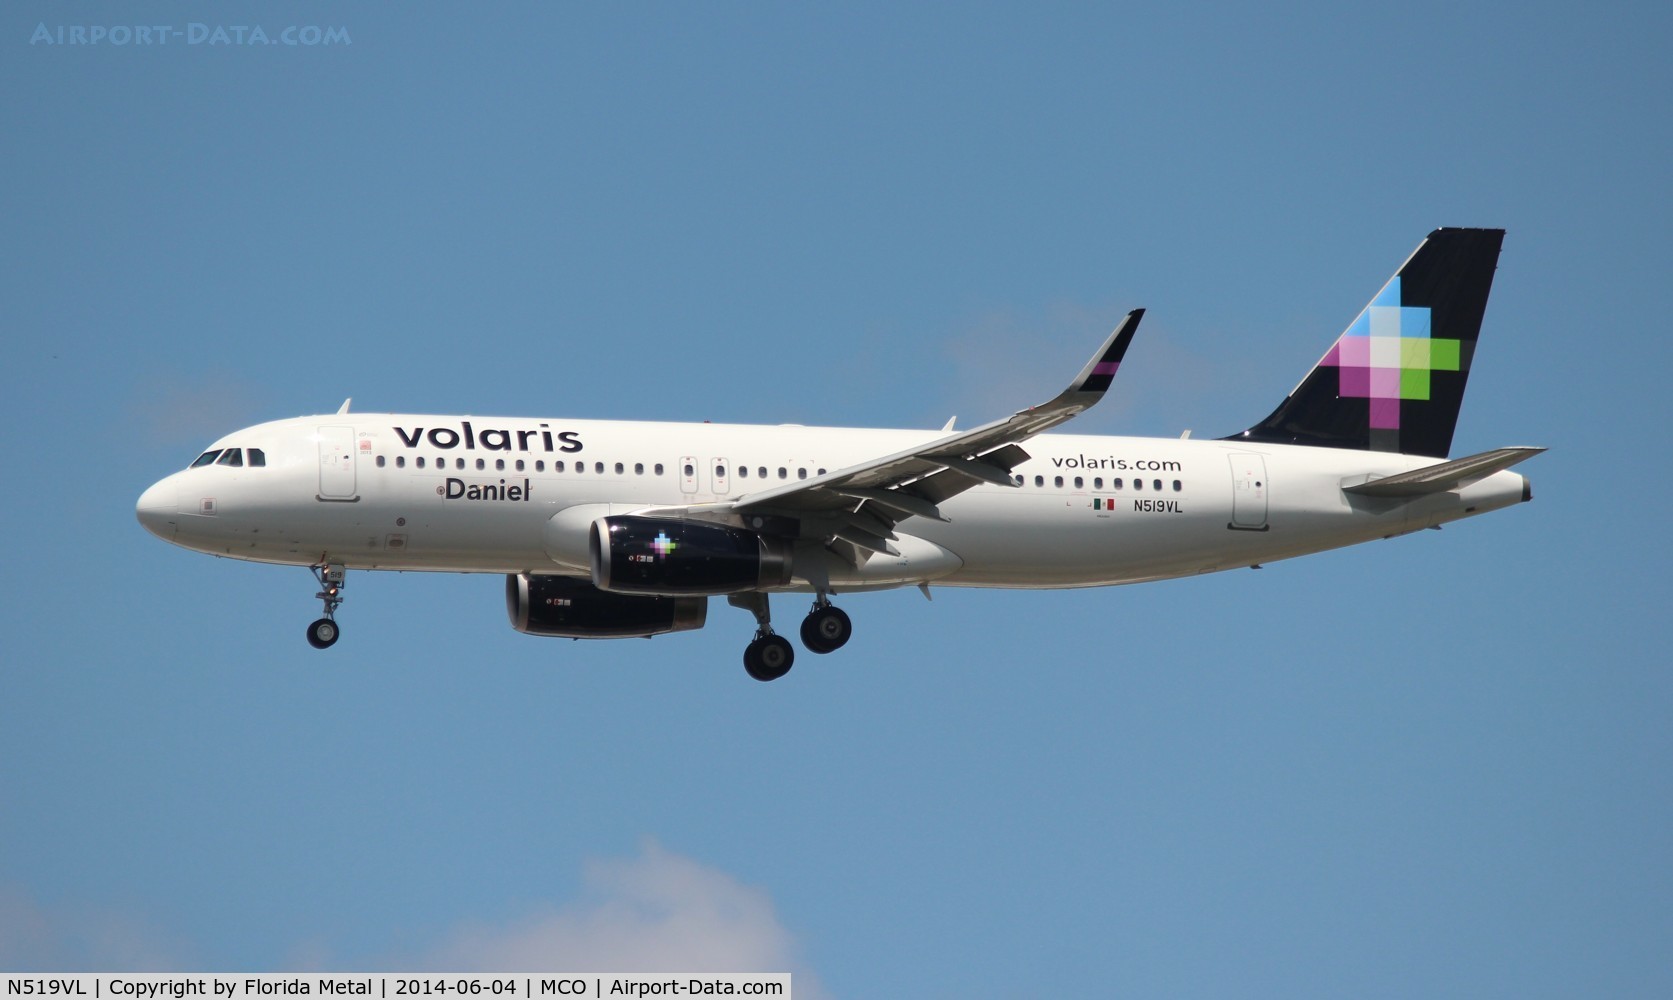 N519VL, 2013 Airbus A320-233 C/N 5510, new to database Volaris A320